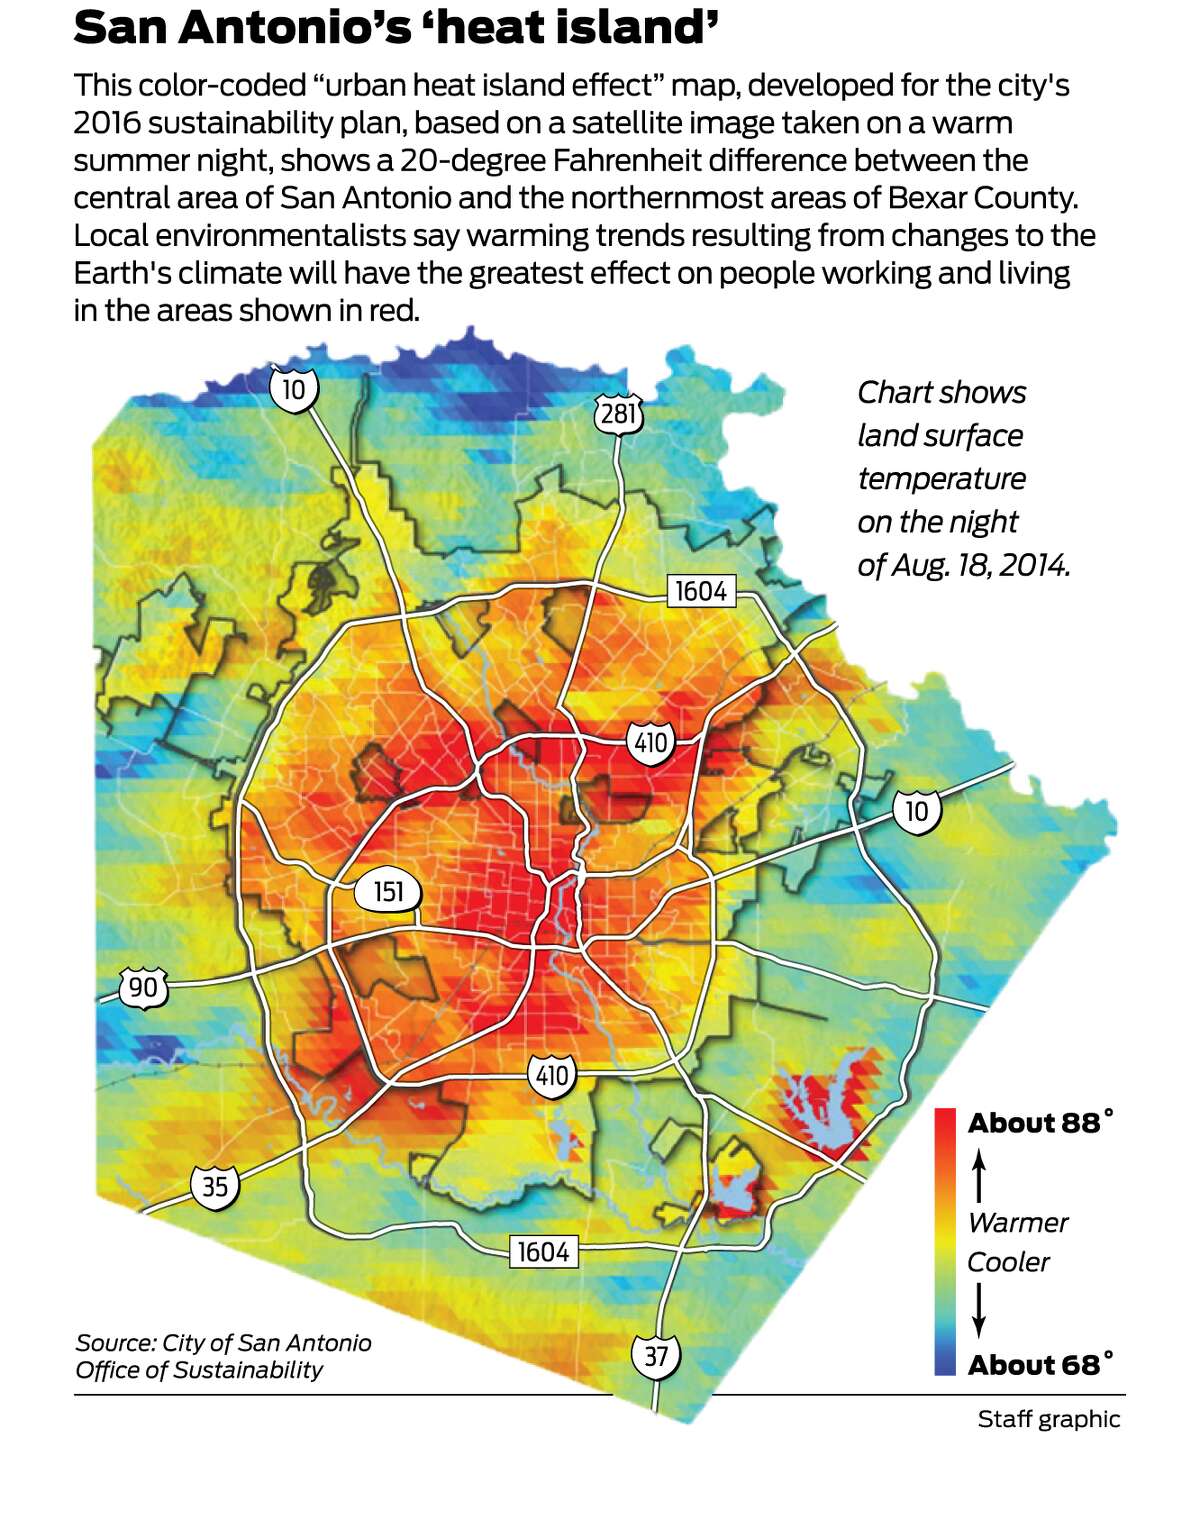 This color-coded "urban heat island effect" map, created for the city of San Antonio, using a NASA satellite image taken on a summer night, shows areas where the most warmth typically radiates at night from buildings, vehicles and other heat-emitting sources. Areas in red are expected to be the ones most affected by global warming trends.